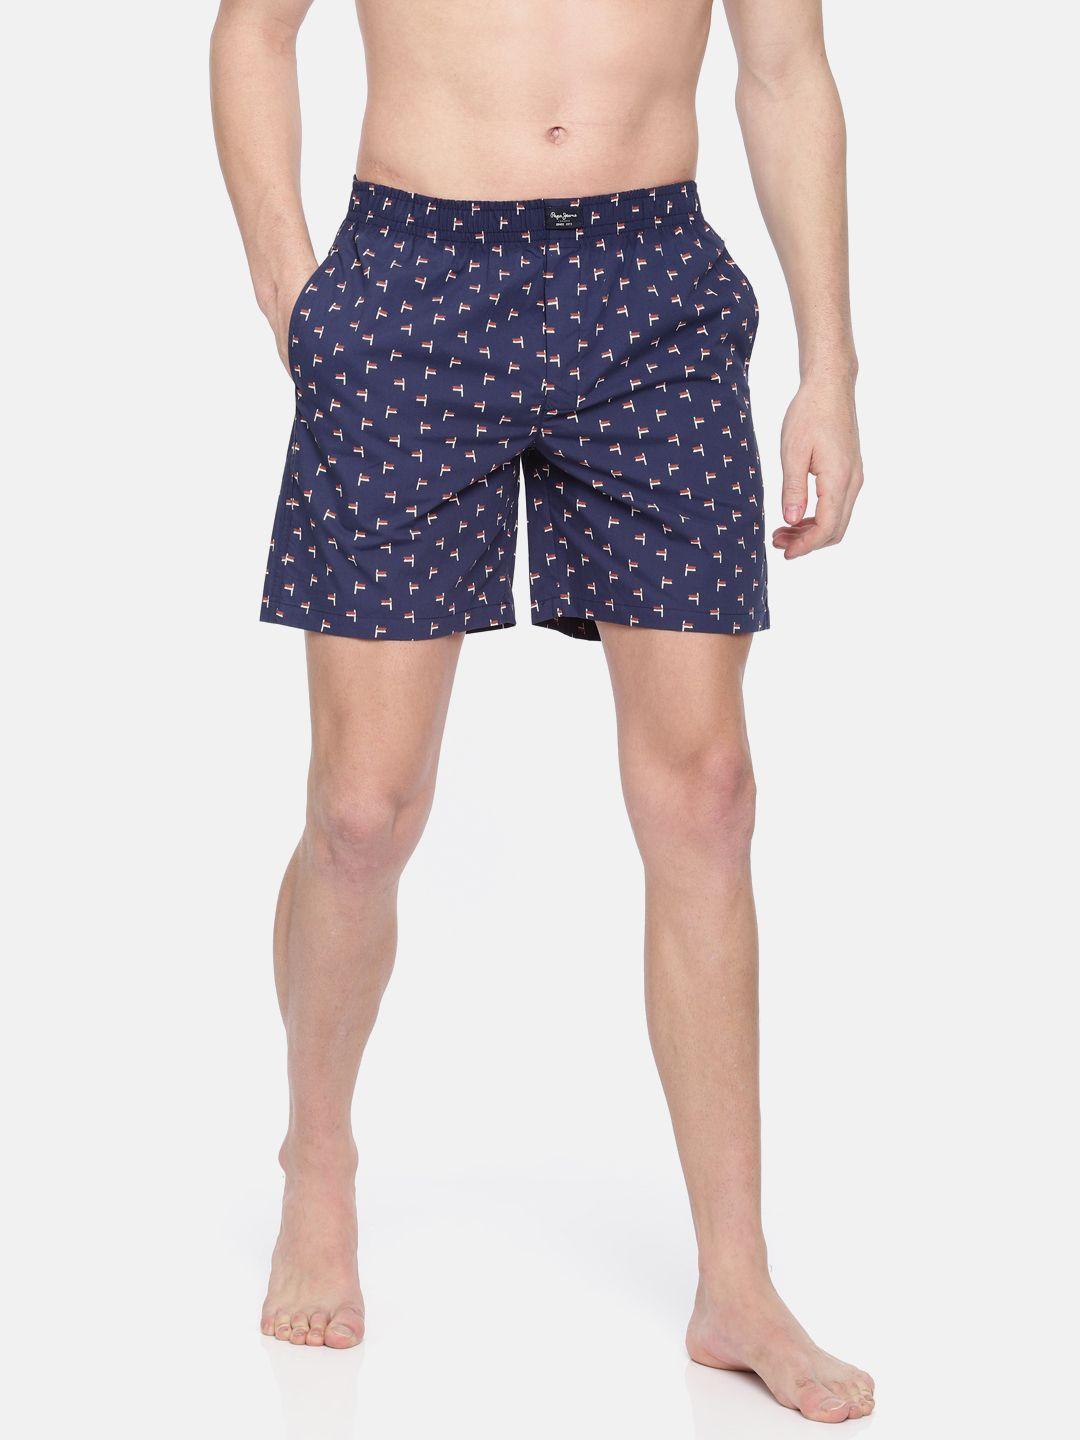 pepe jeans men navy & red printed    pure cotton boxers 8904311306207